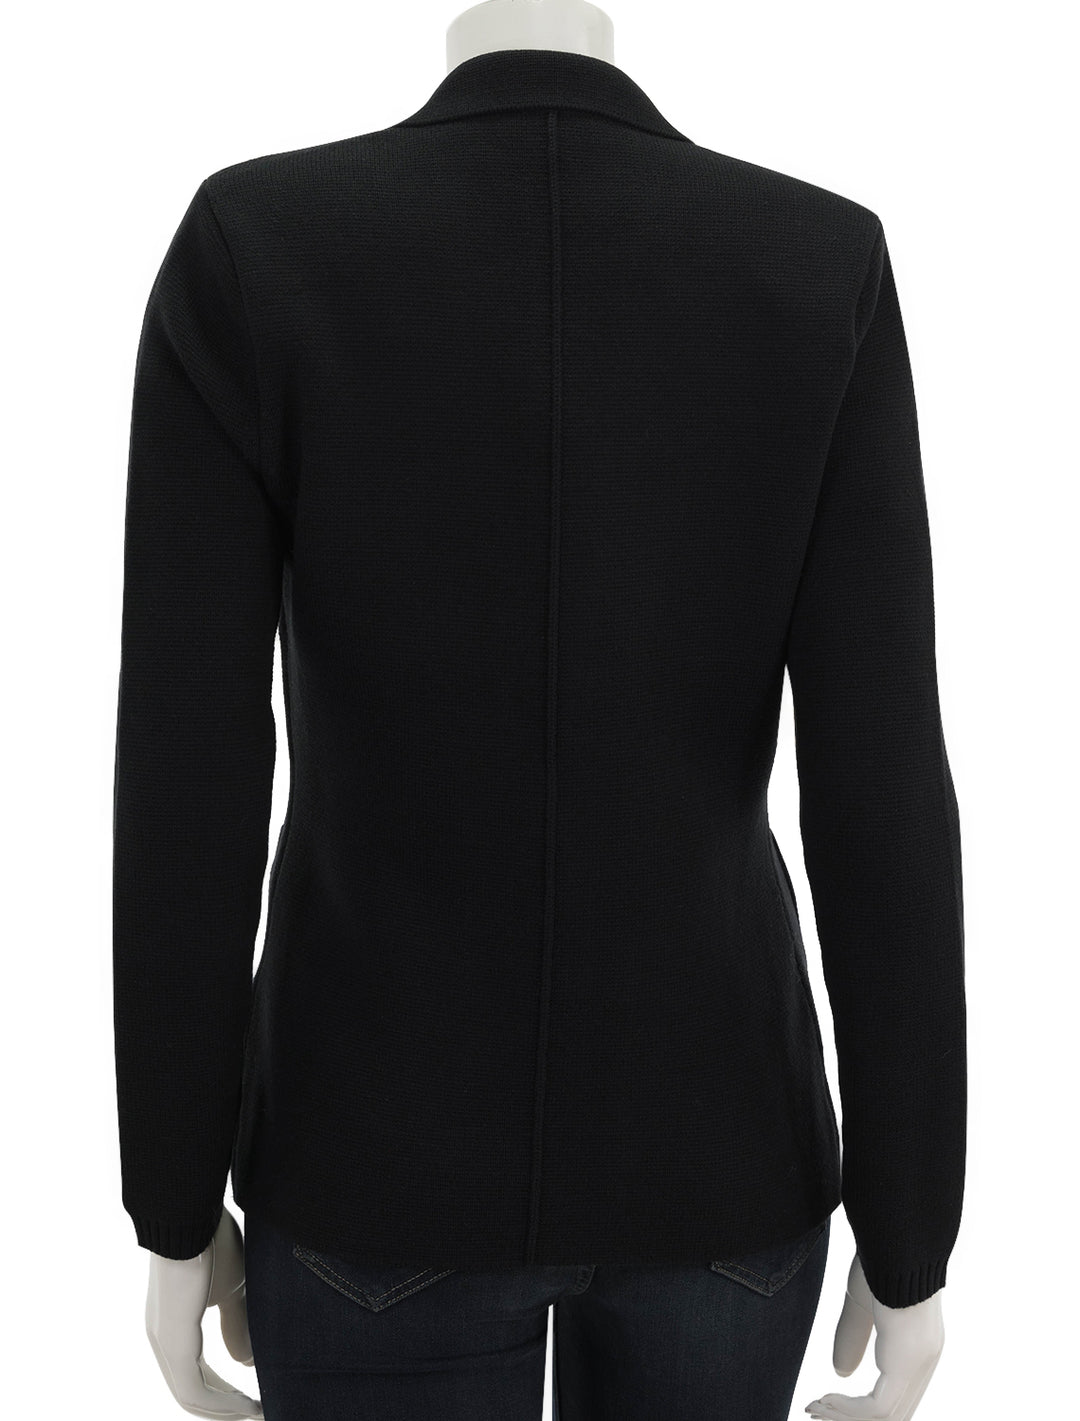 Back view of L'agence's lacey knit blazer in black.